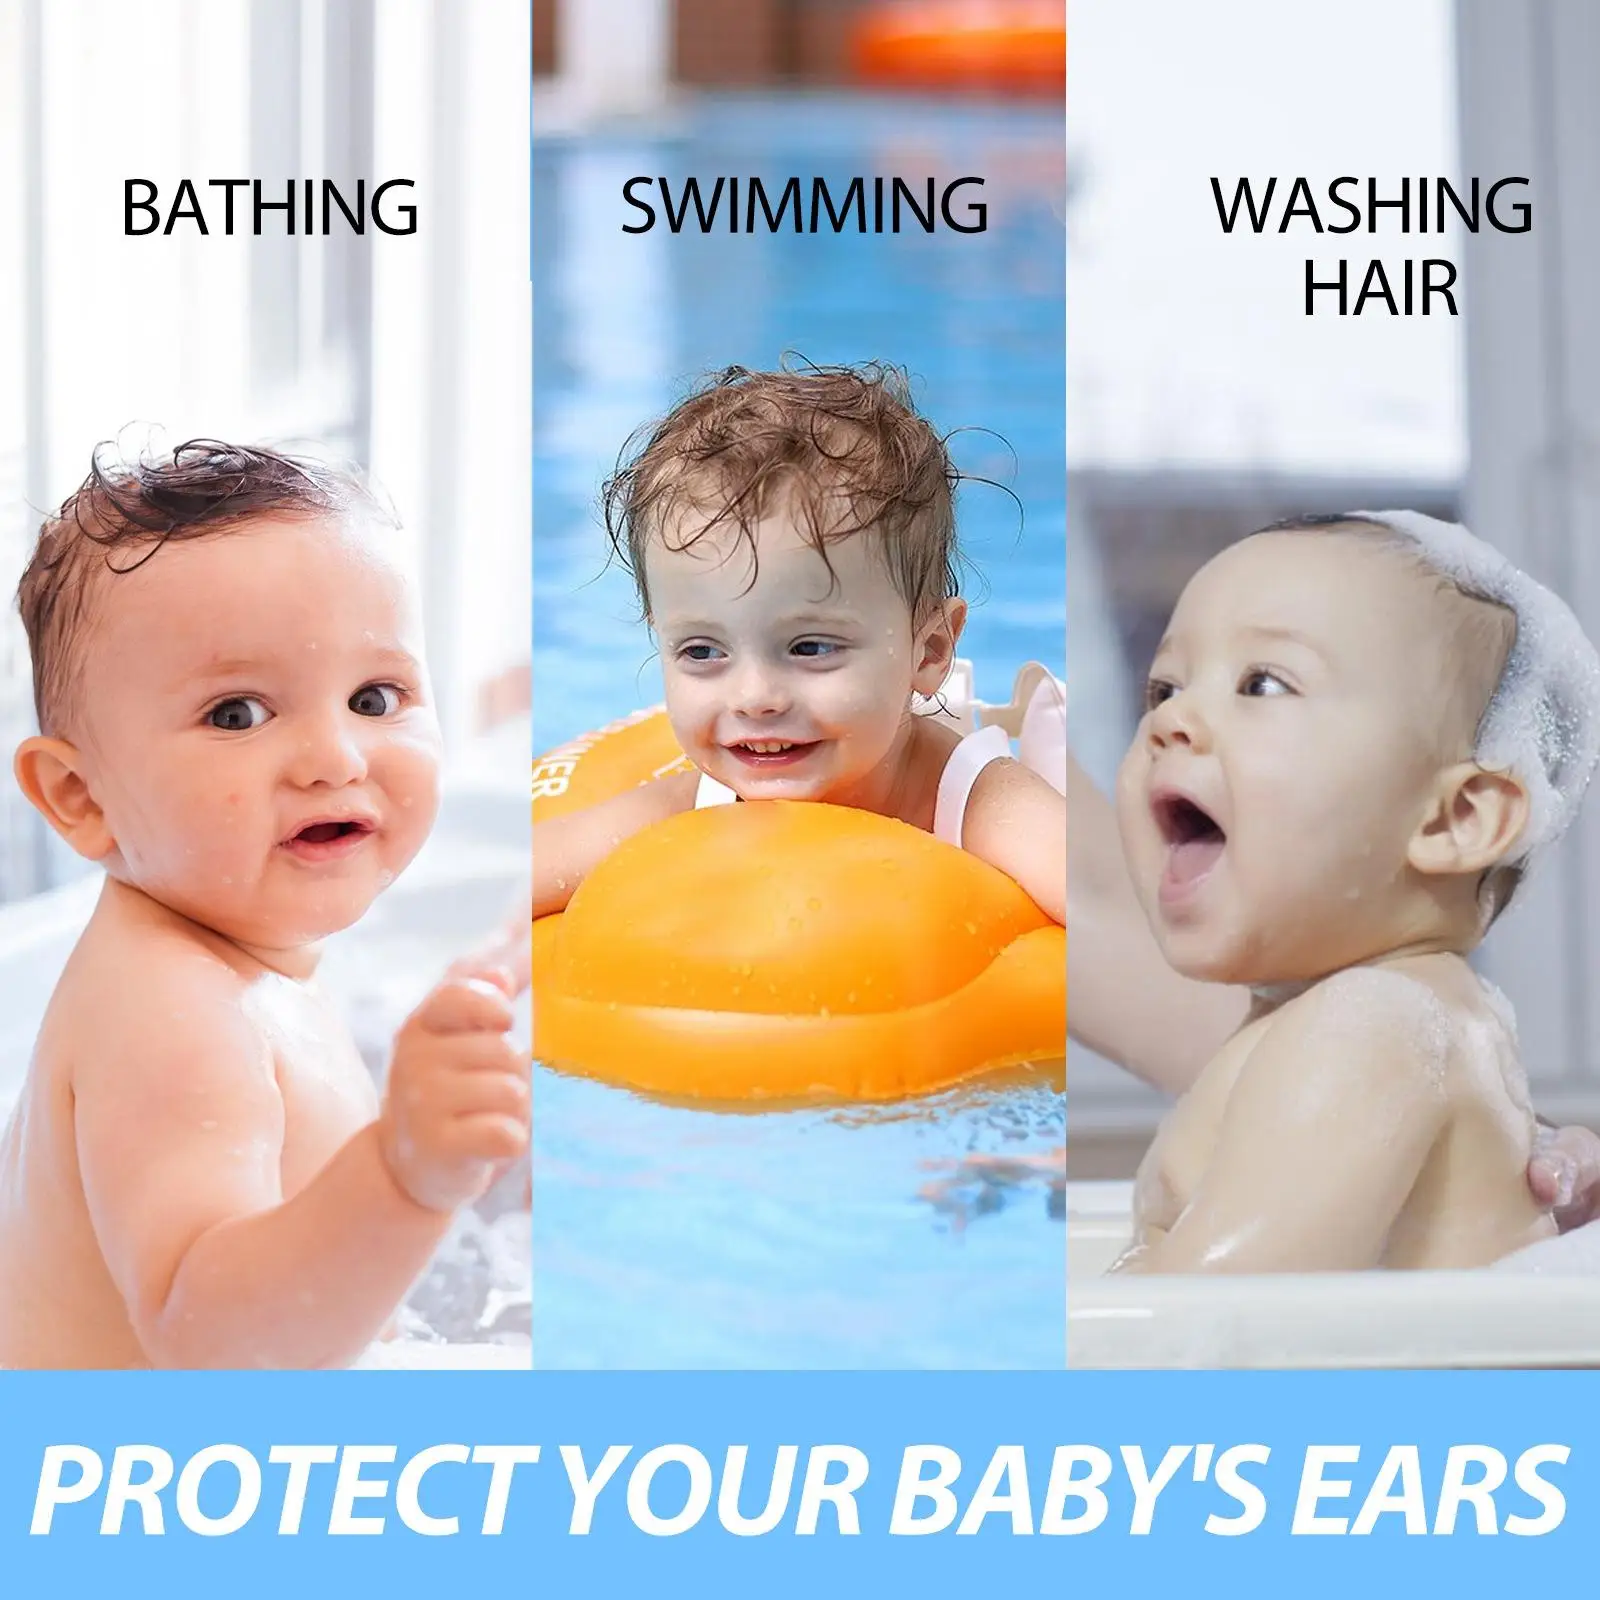 30 Pieces Baby Waterproof Ear Stickers Easy Carry Made of Soft Breathable PU Film Ear Protection for Shower Bathing Swiming